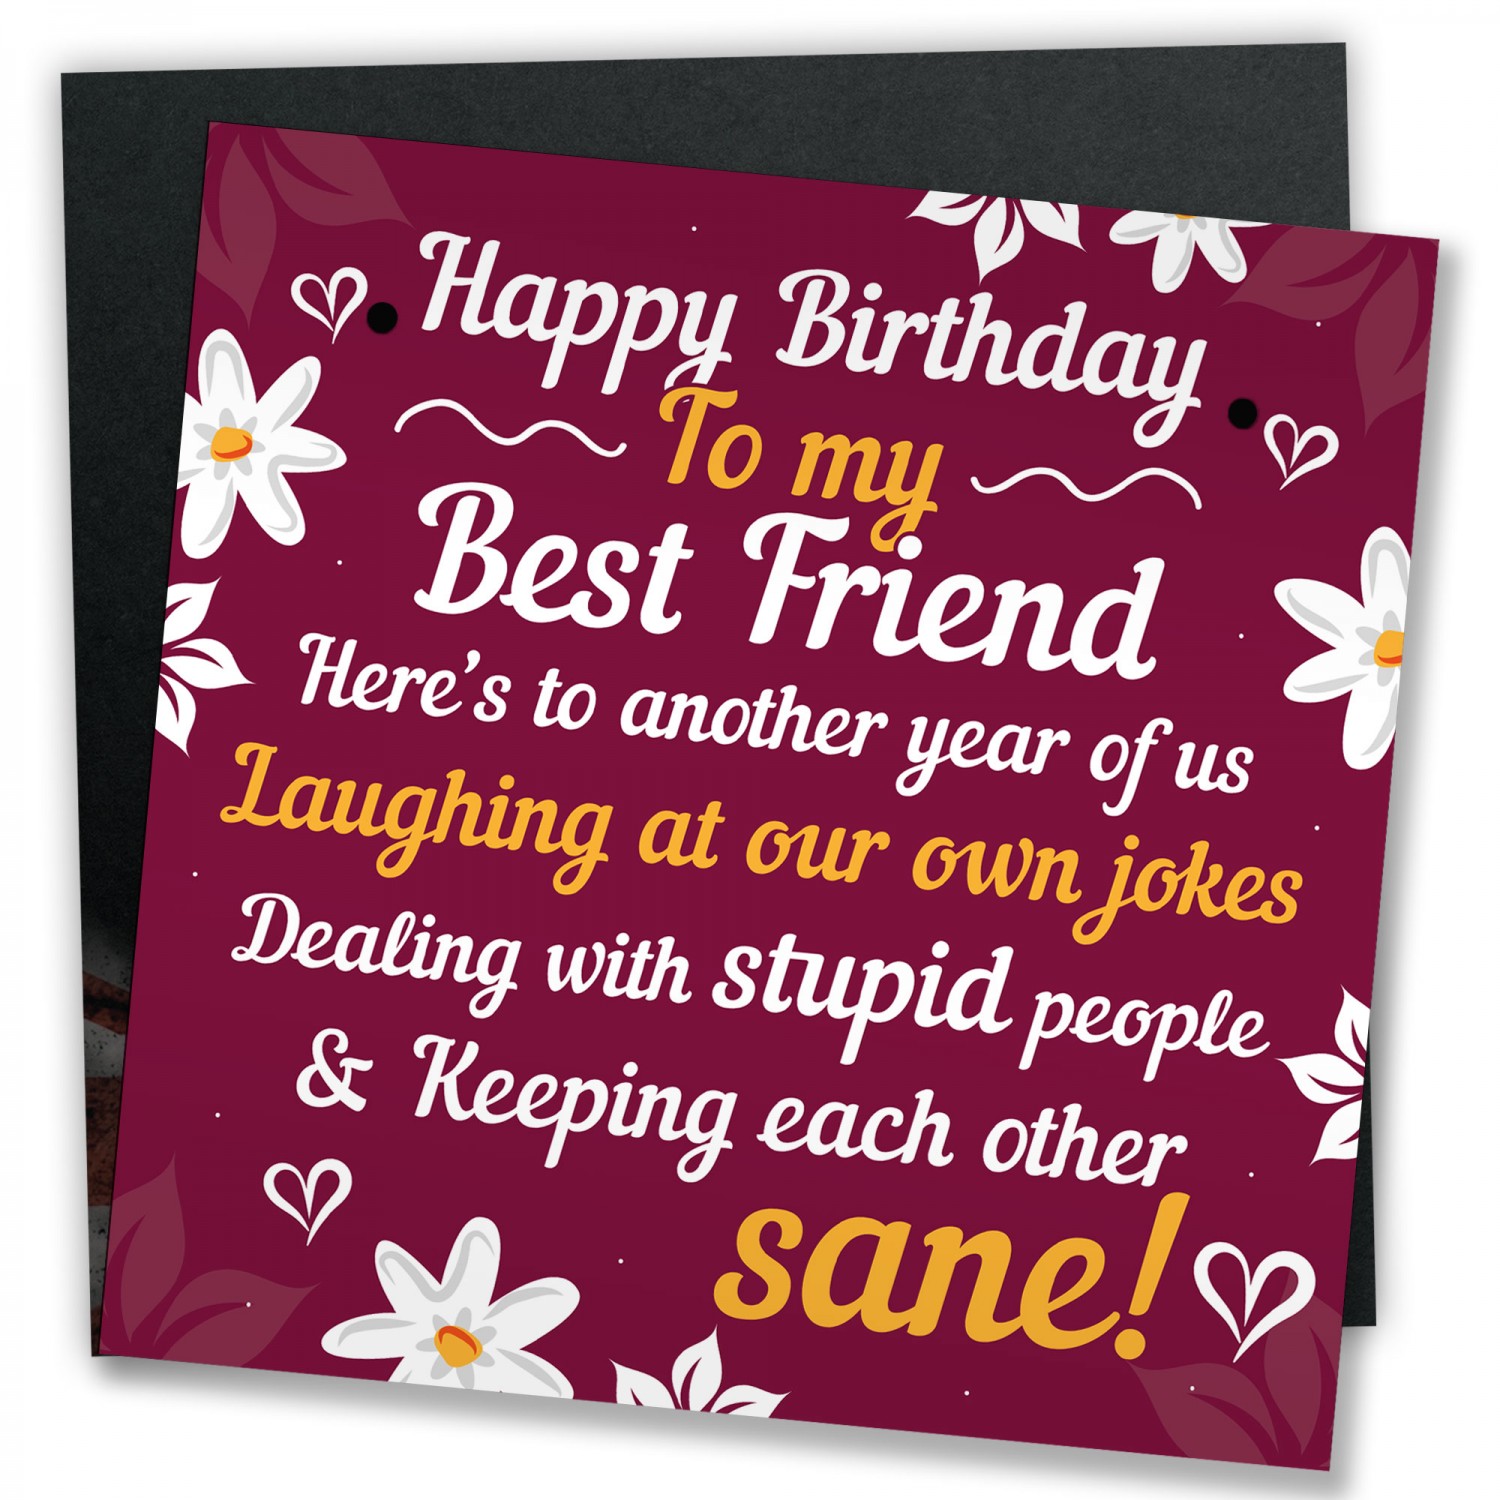 Birthday Wishes for Best Friend Pictures: Heartfelt and Creative ...